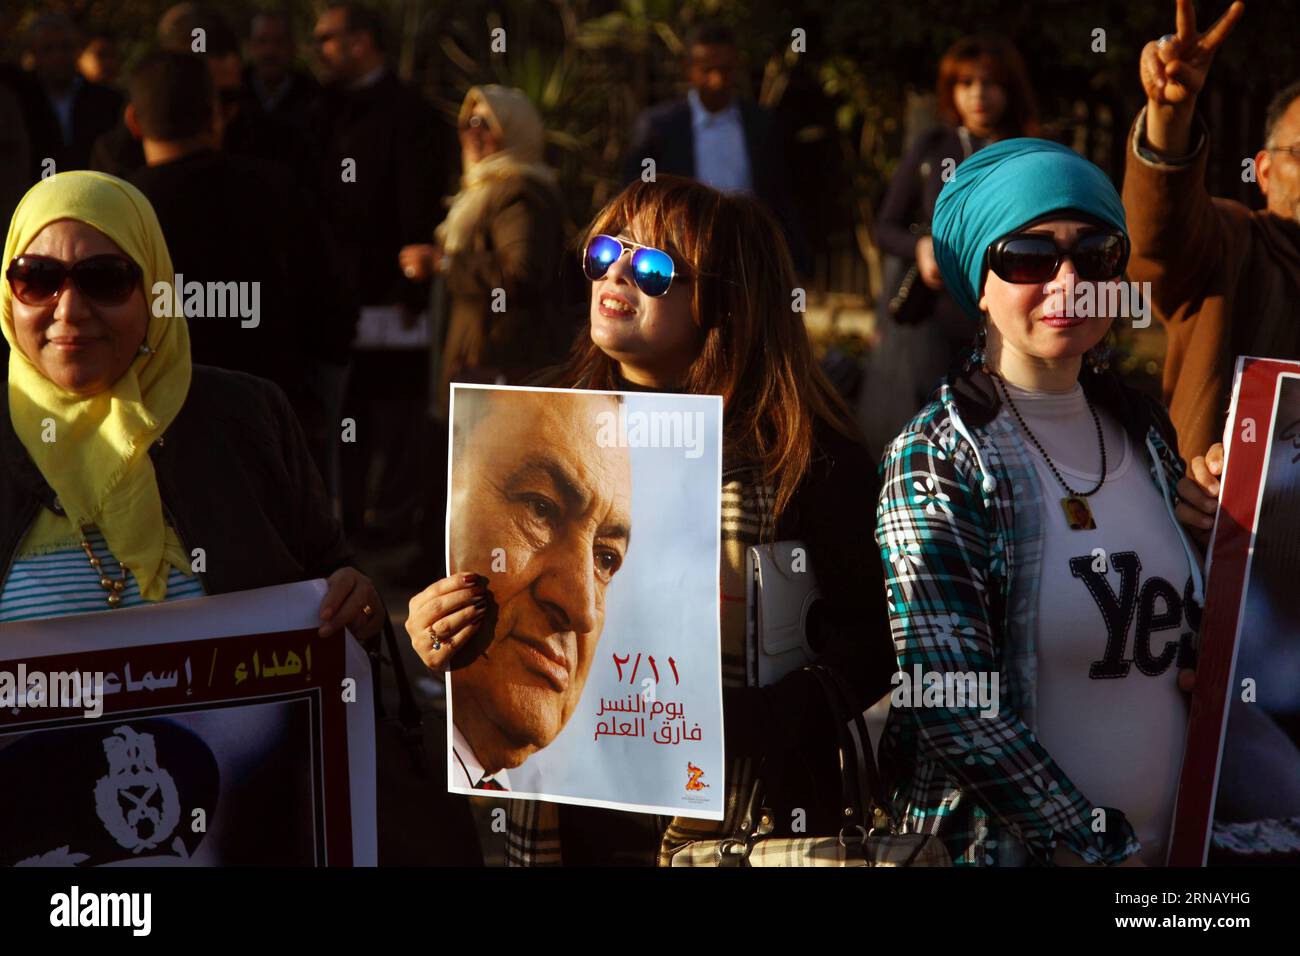 (160211) -- CAIRO, Feb.11, 2016 -- Supporters of Egypt s former President Hosni Mubarak hold posters during a protest marking the 5th anniversary of Mubarak s resignation outside Maadi Armed Forces Hospital in Cairo, Egypt on Feb.11,2016.) EGYPT-CAIRO-MUBARAK-PROTEST AhmedxGomaa PUBLICATIONxNOTxINxCHN   Cairo Feb 11 2016 Supporters of Egypt S Former President Hosni Mubarak Hold Posters during a Protest marking The 5th Anniversary of Mubarak S Resignation outside Maadi Armed Forces Hospital in Cairo Egypt ON Feb 11 2016 Egypt Cairo Mubarak Protest AhmedxGomaa PUBLICATIONxNOTxINxCHN Stock Photo